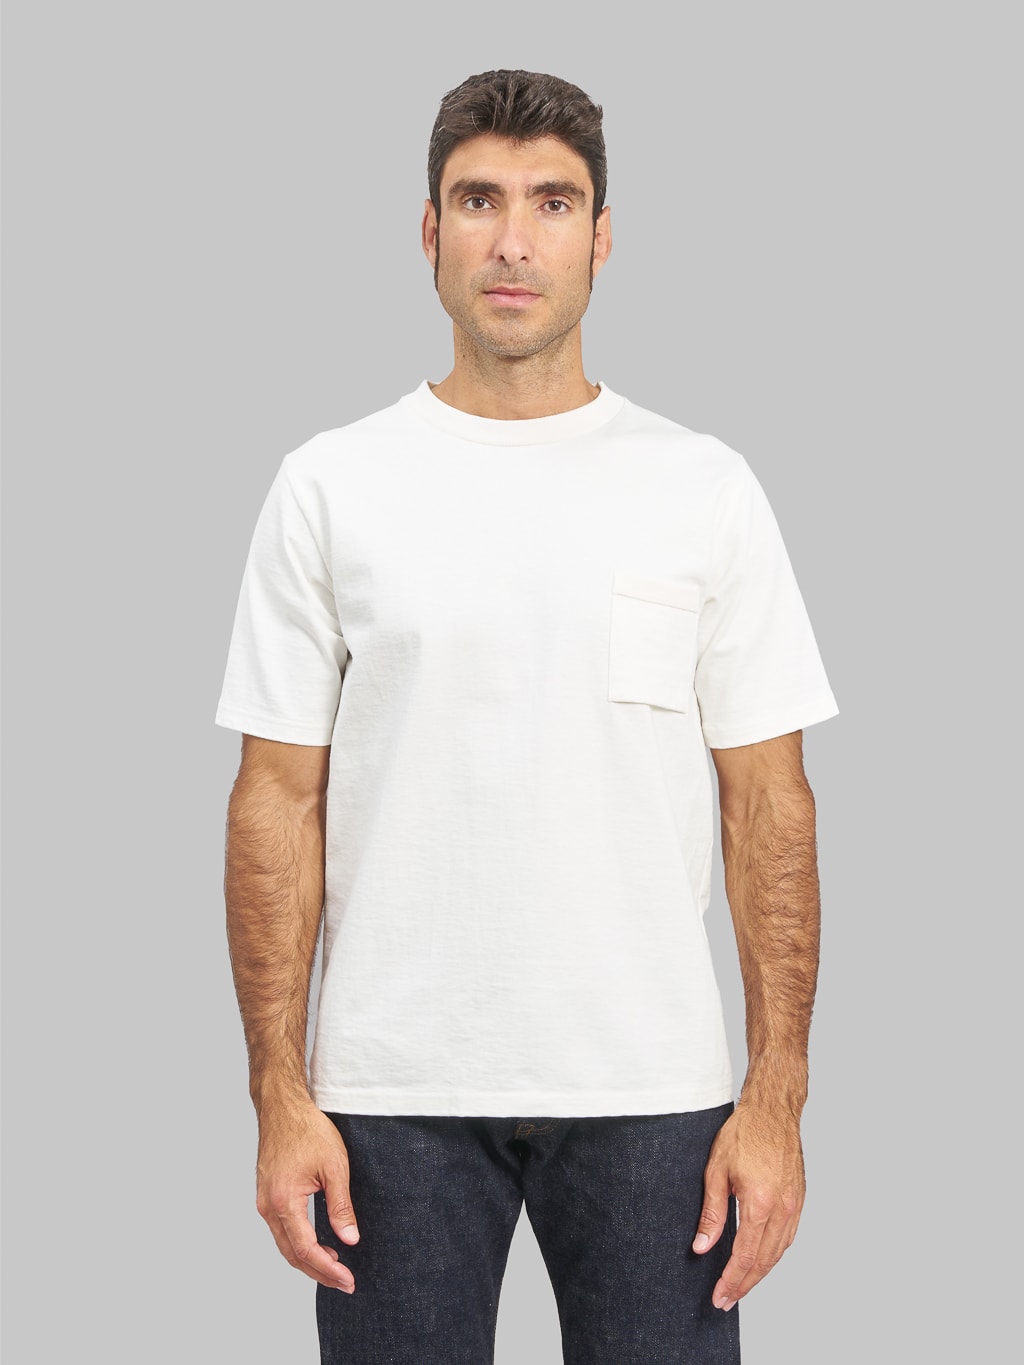 Jackman Dotsume Pocket loopwheel TShirt Off White relaxed fit